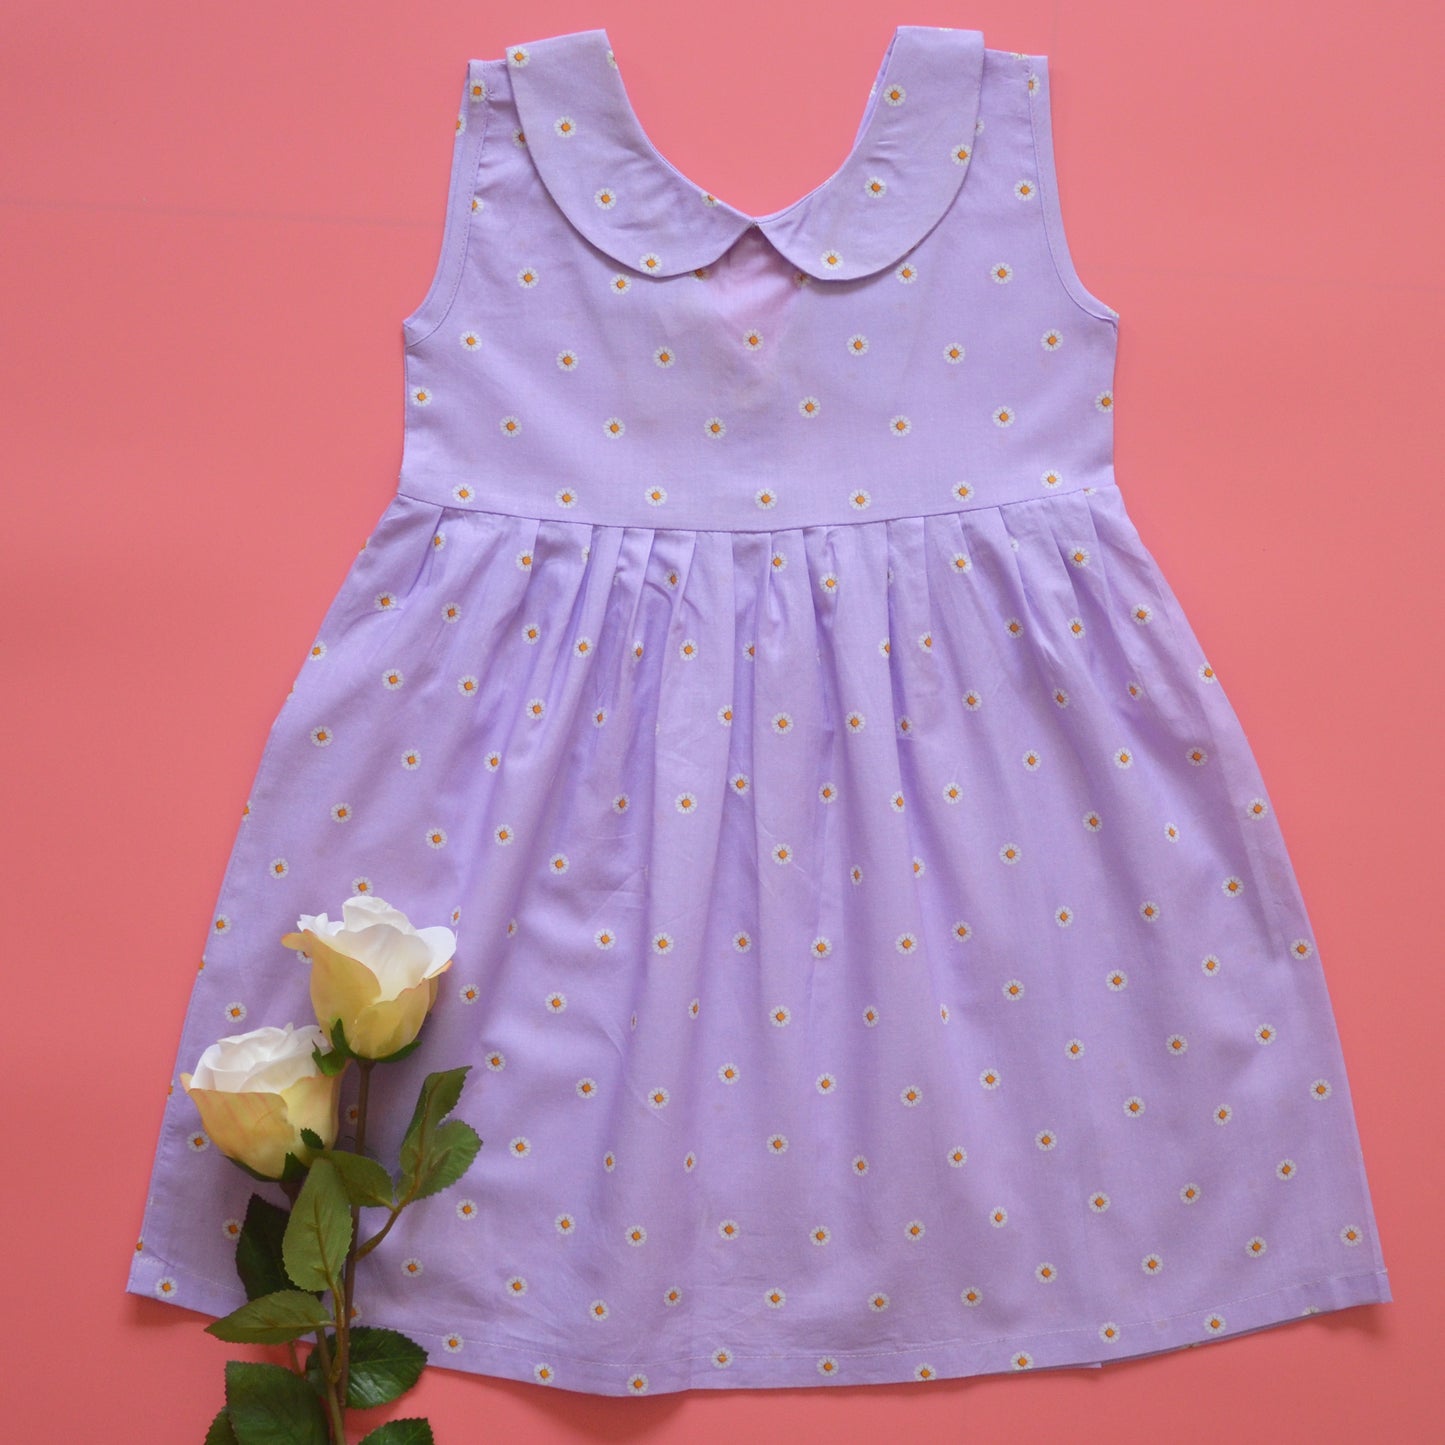 Alice dress in daisy print with back v neck collar - Purple